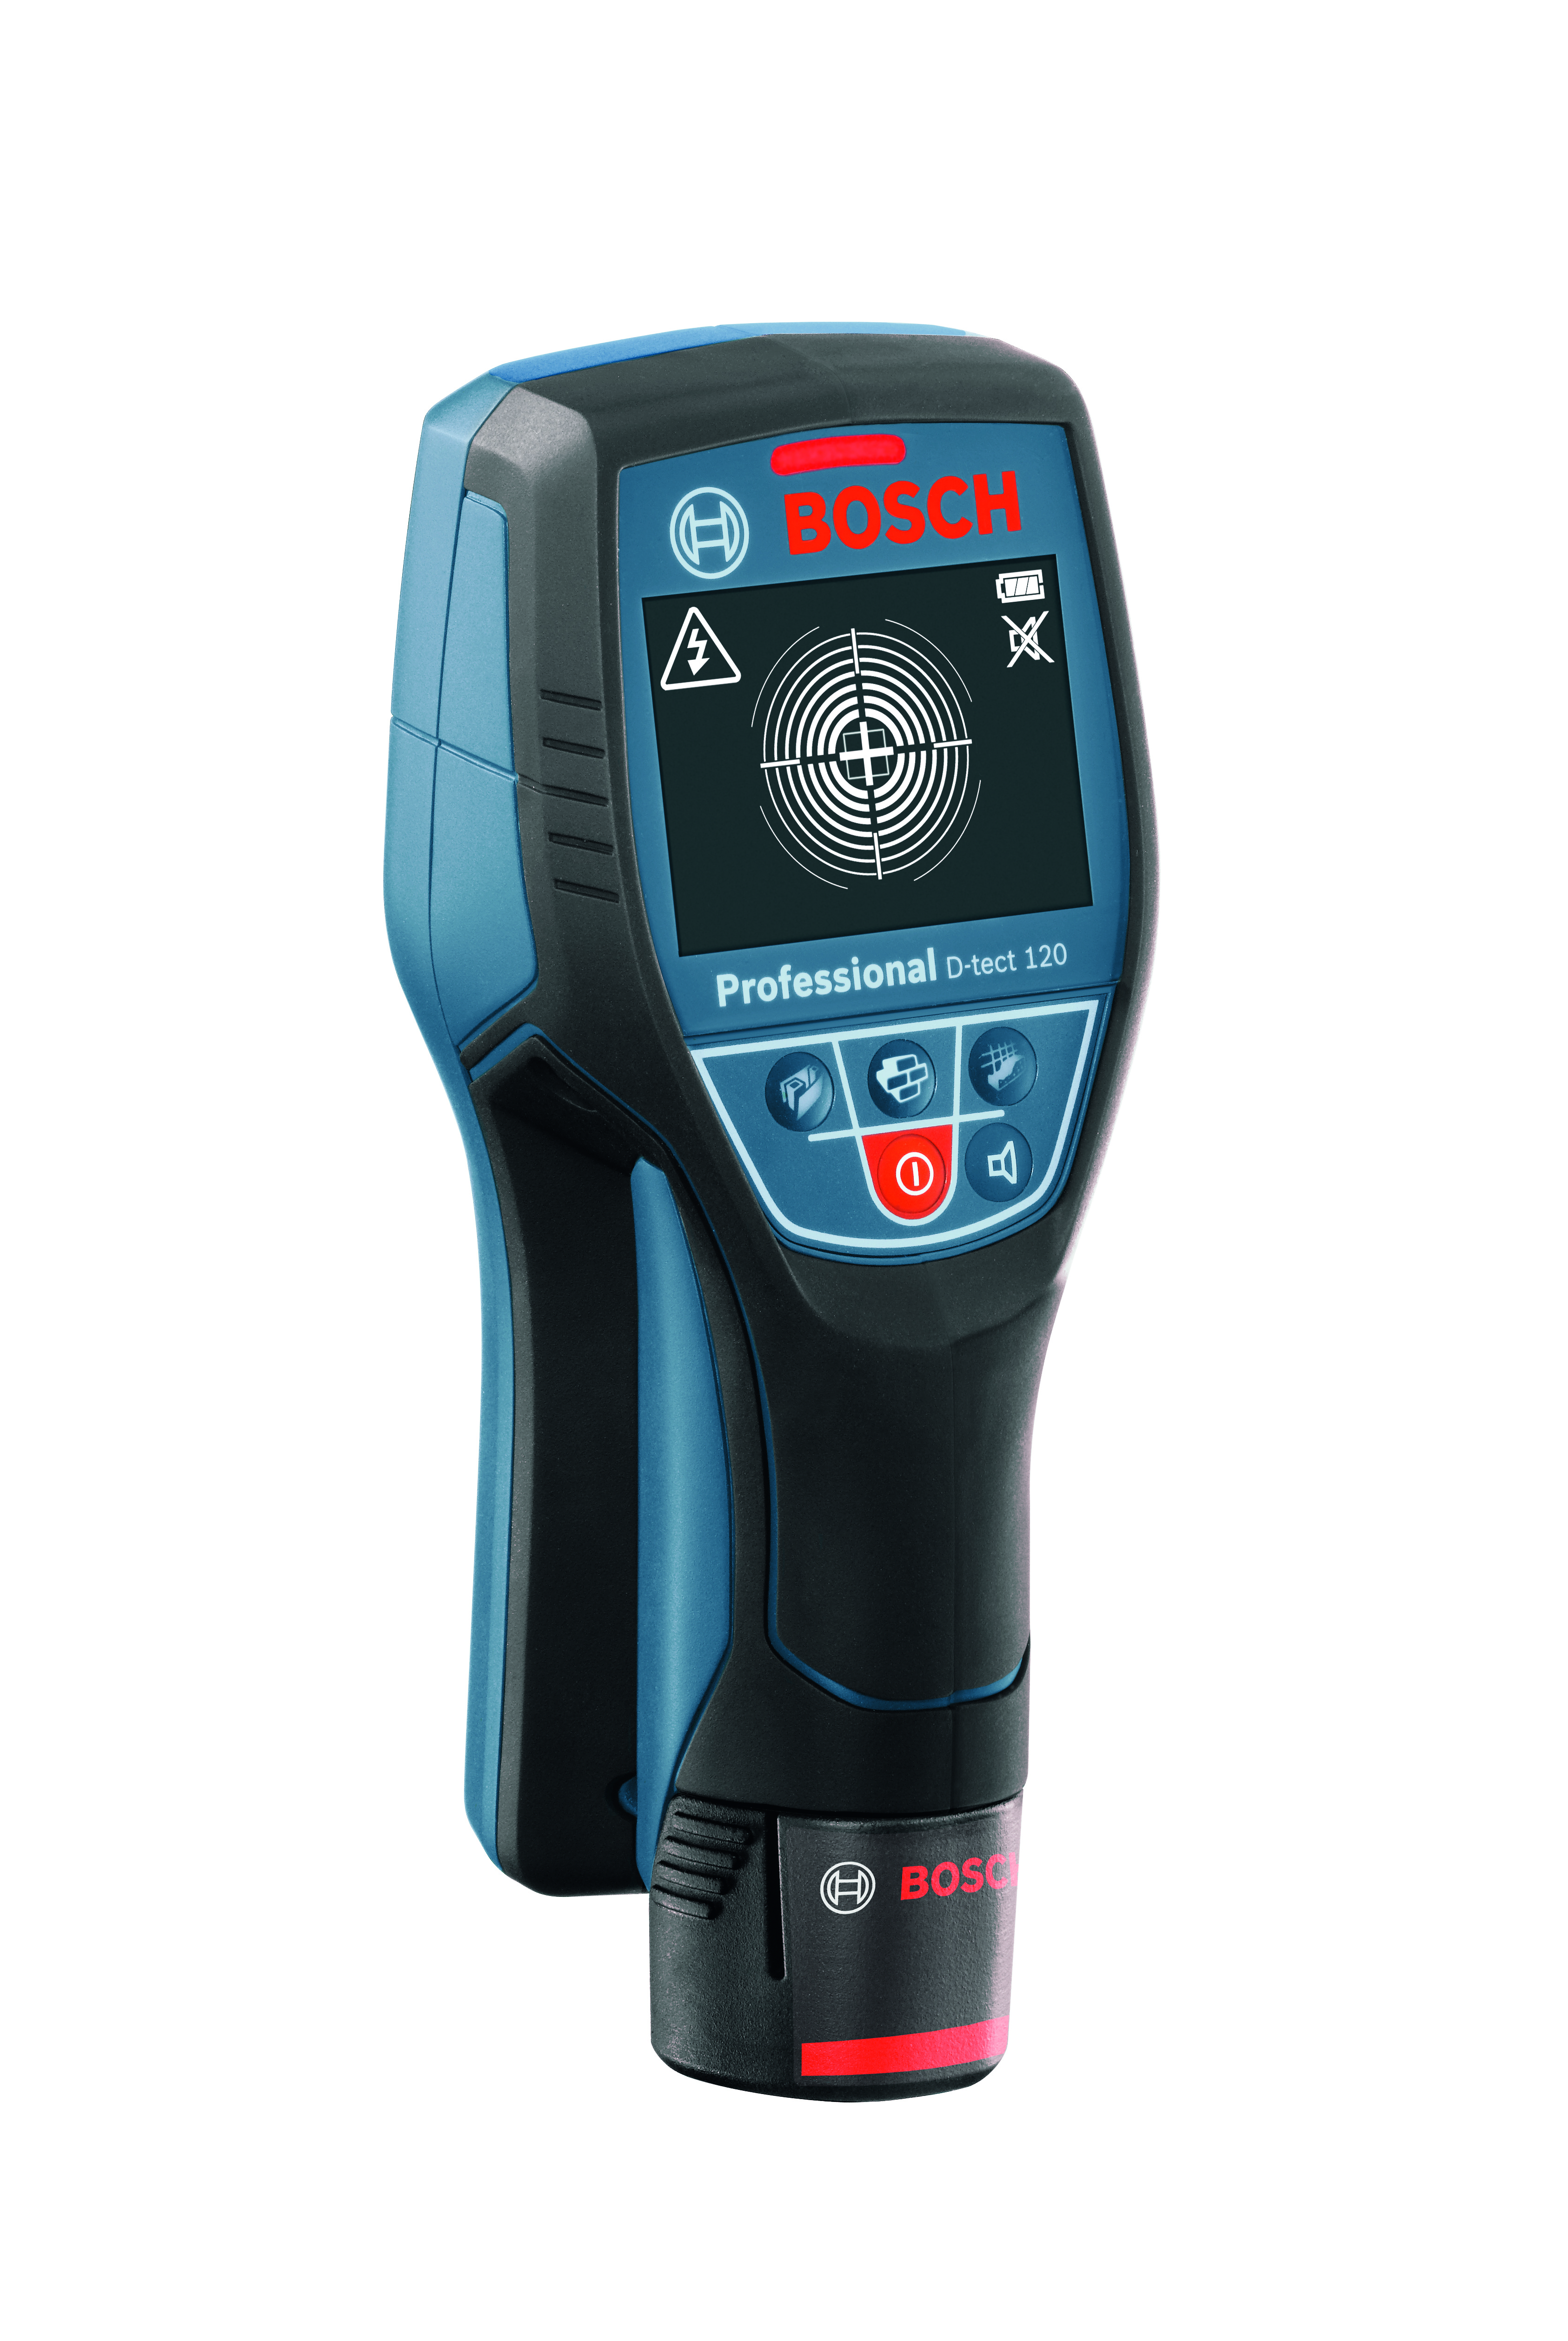 p a bosch d-tect120 product persp fin v2